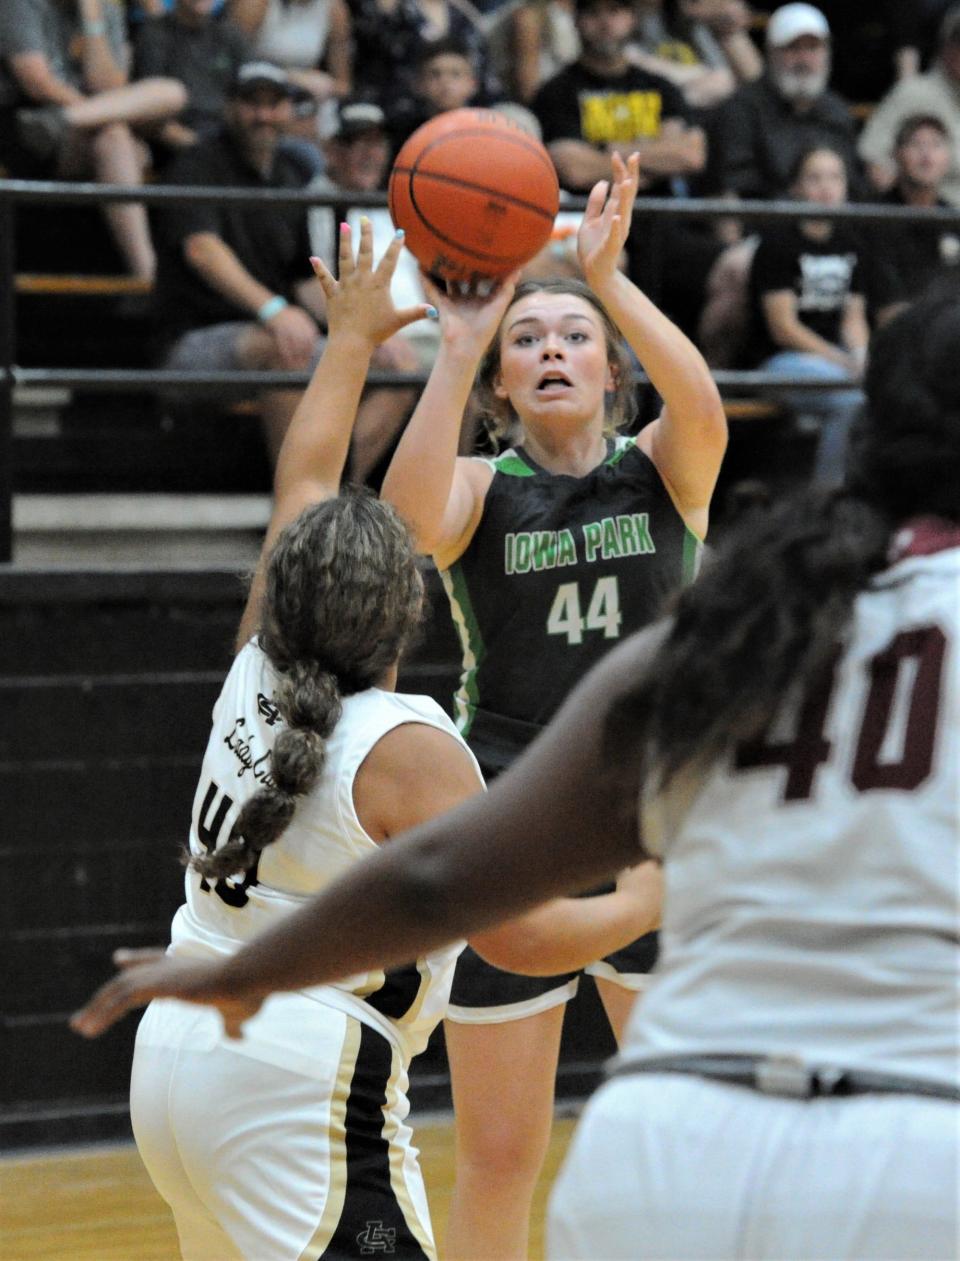 Iowa Park's Gracyn Fields shoots during the 2022 Maskat Shrine Annual Oil Bowl Classic girls basketball game at Rider on Friday, June 17, 2022.